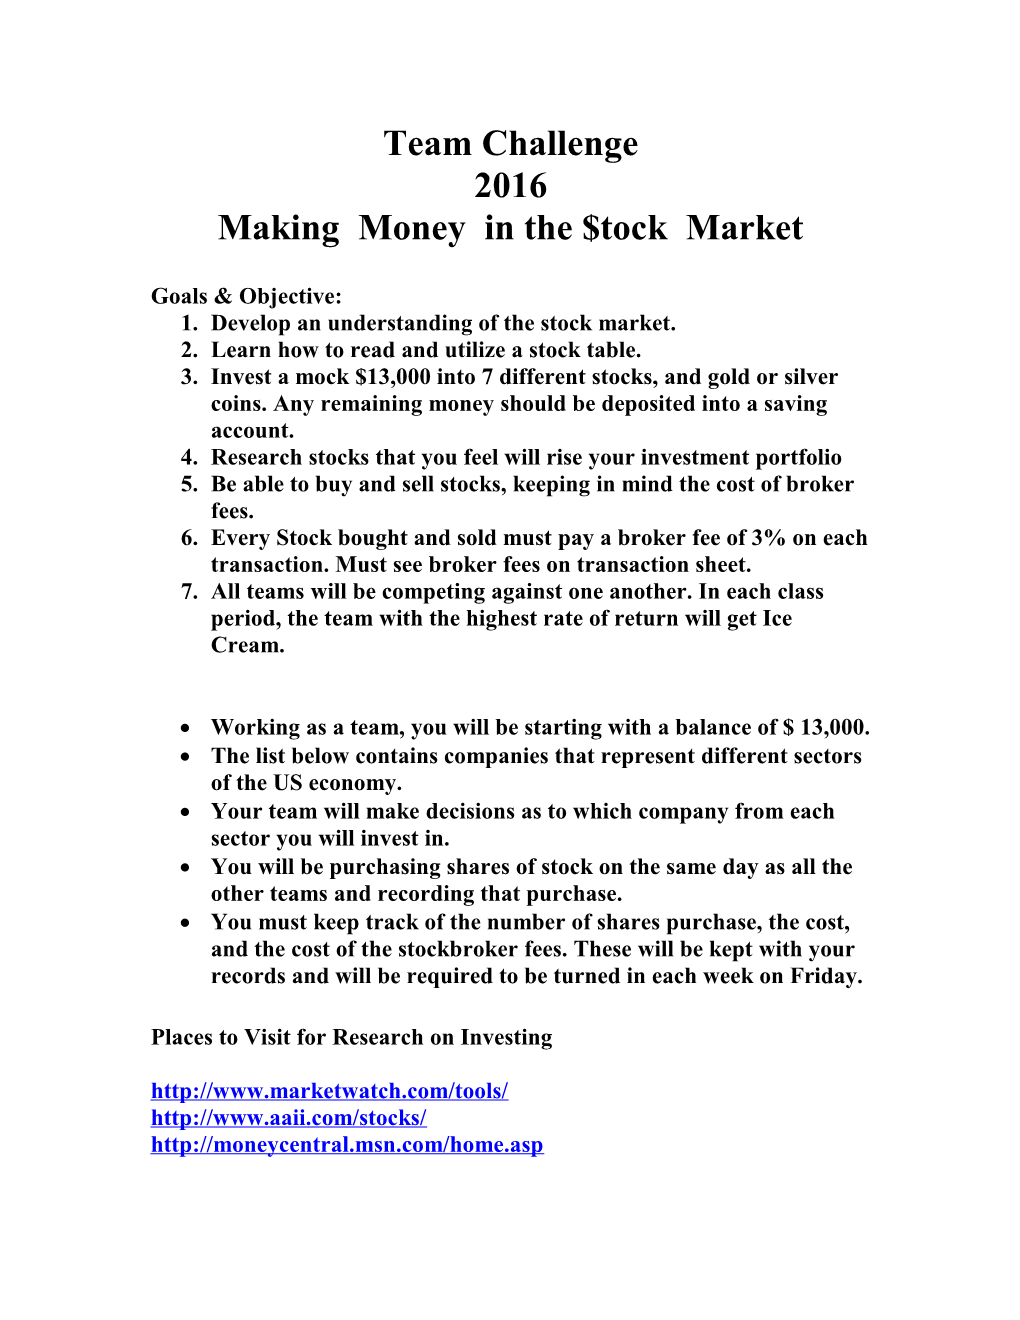 2. Learn How to Read and Utilize a Stock Table